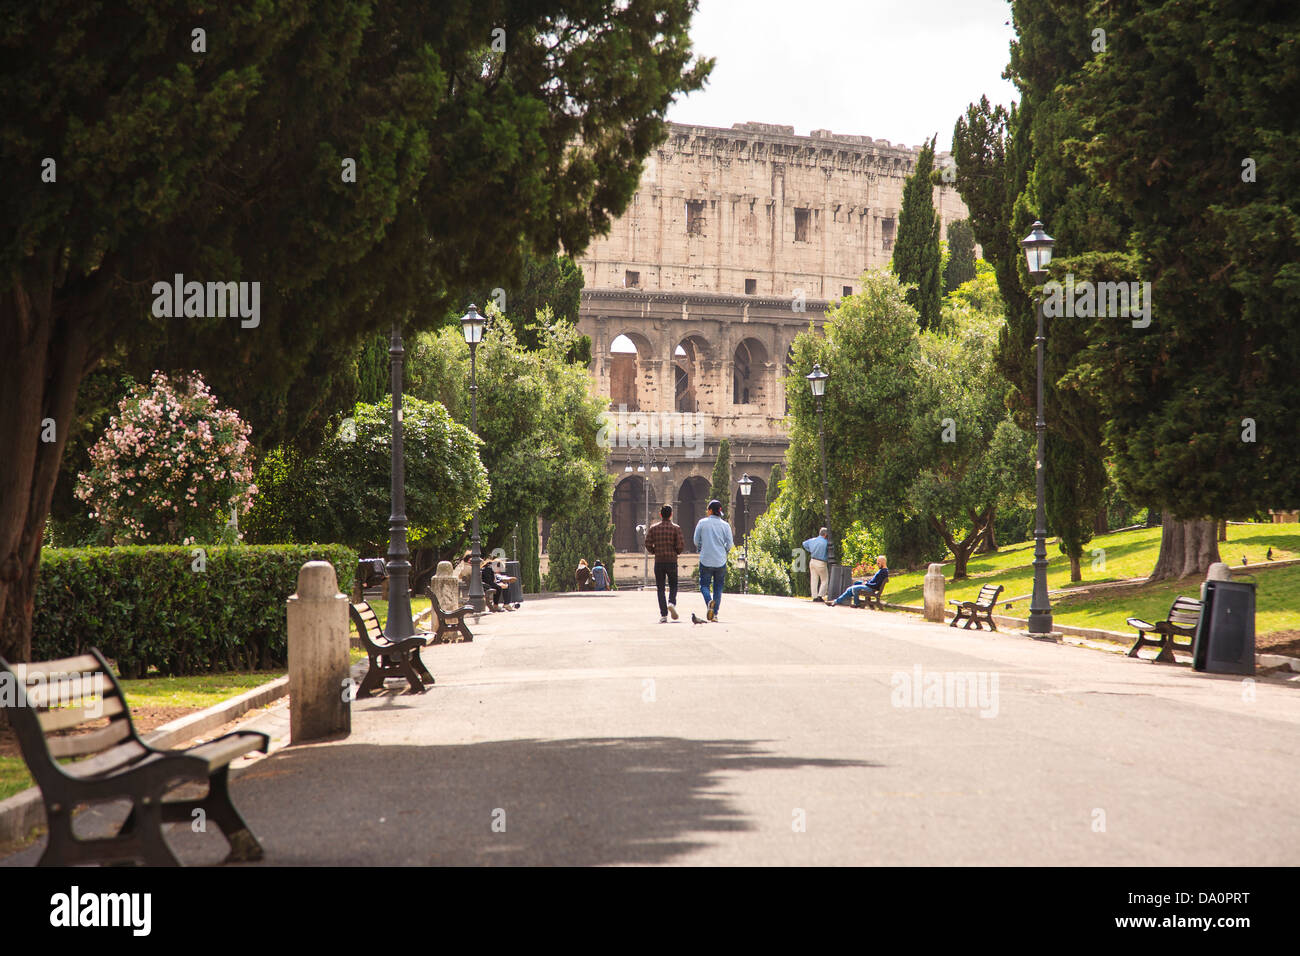 A section of the Colosseum seen from the parco del colle oppio in Rome, Italy. Stock Photo